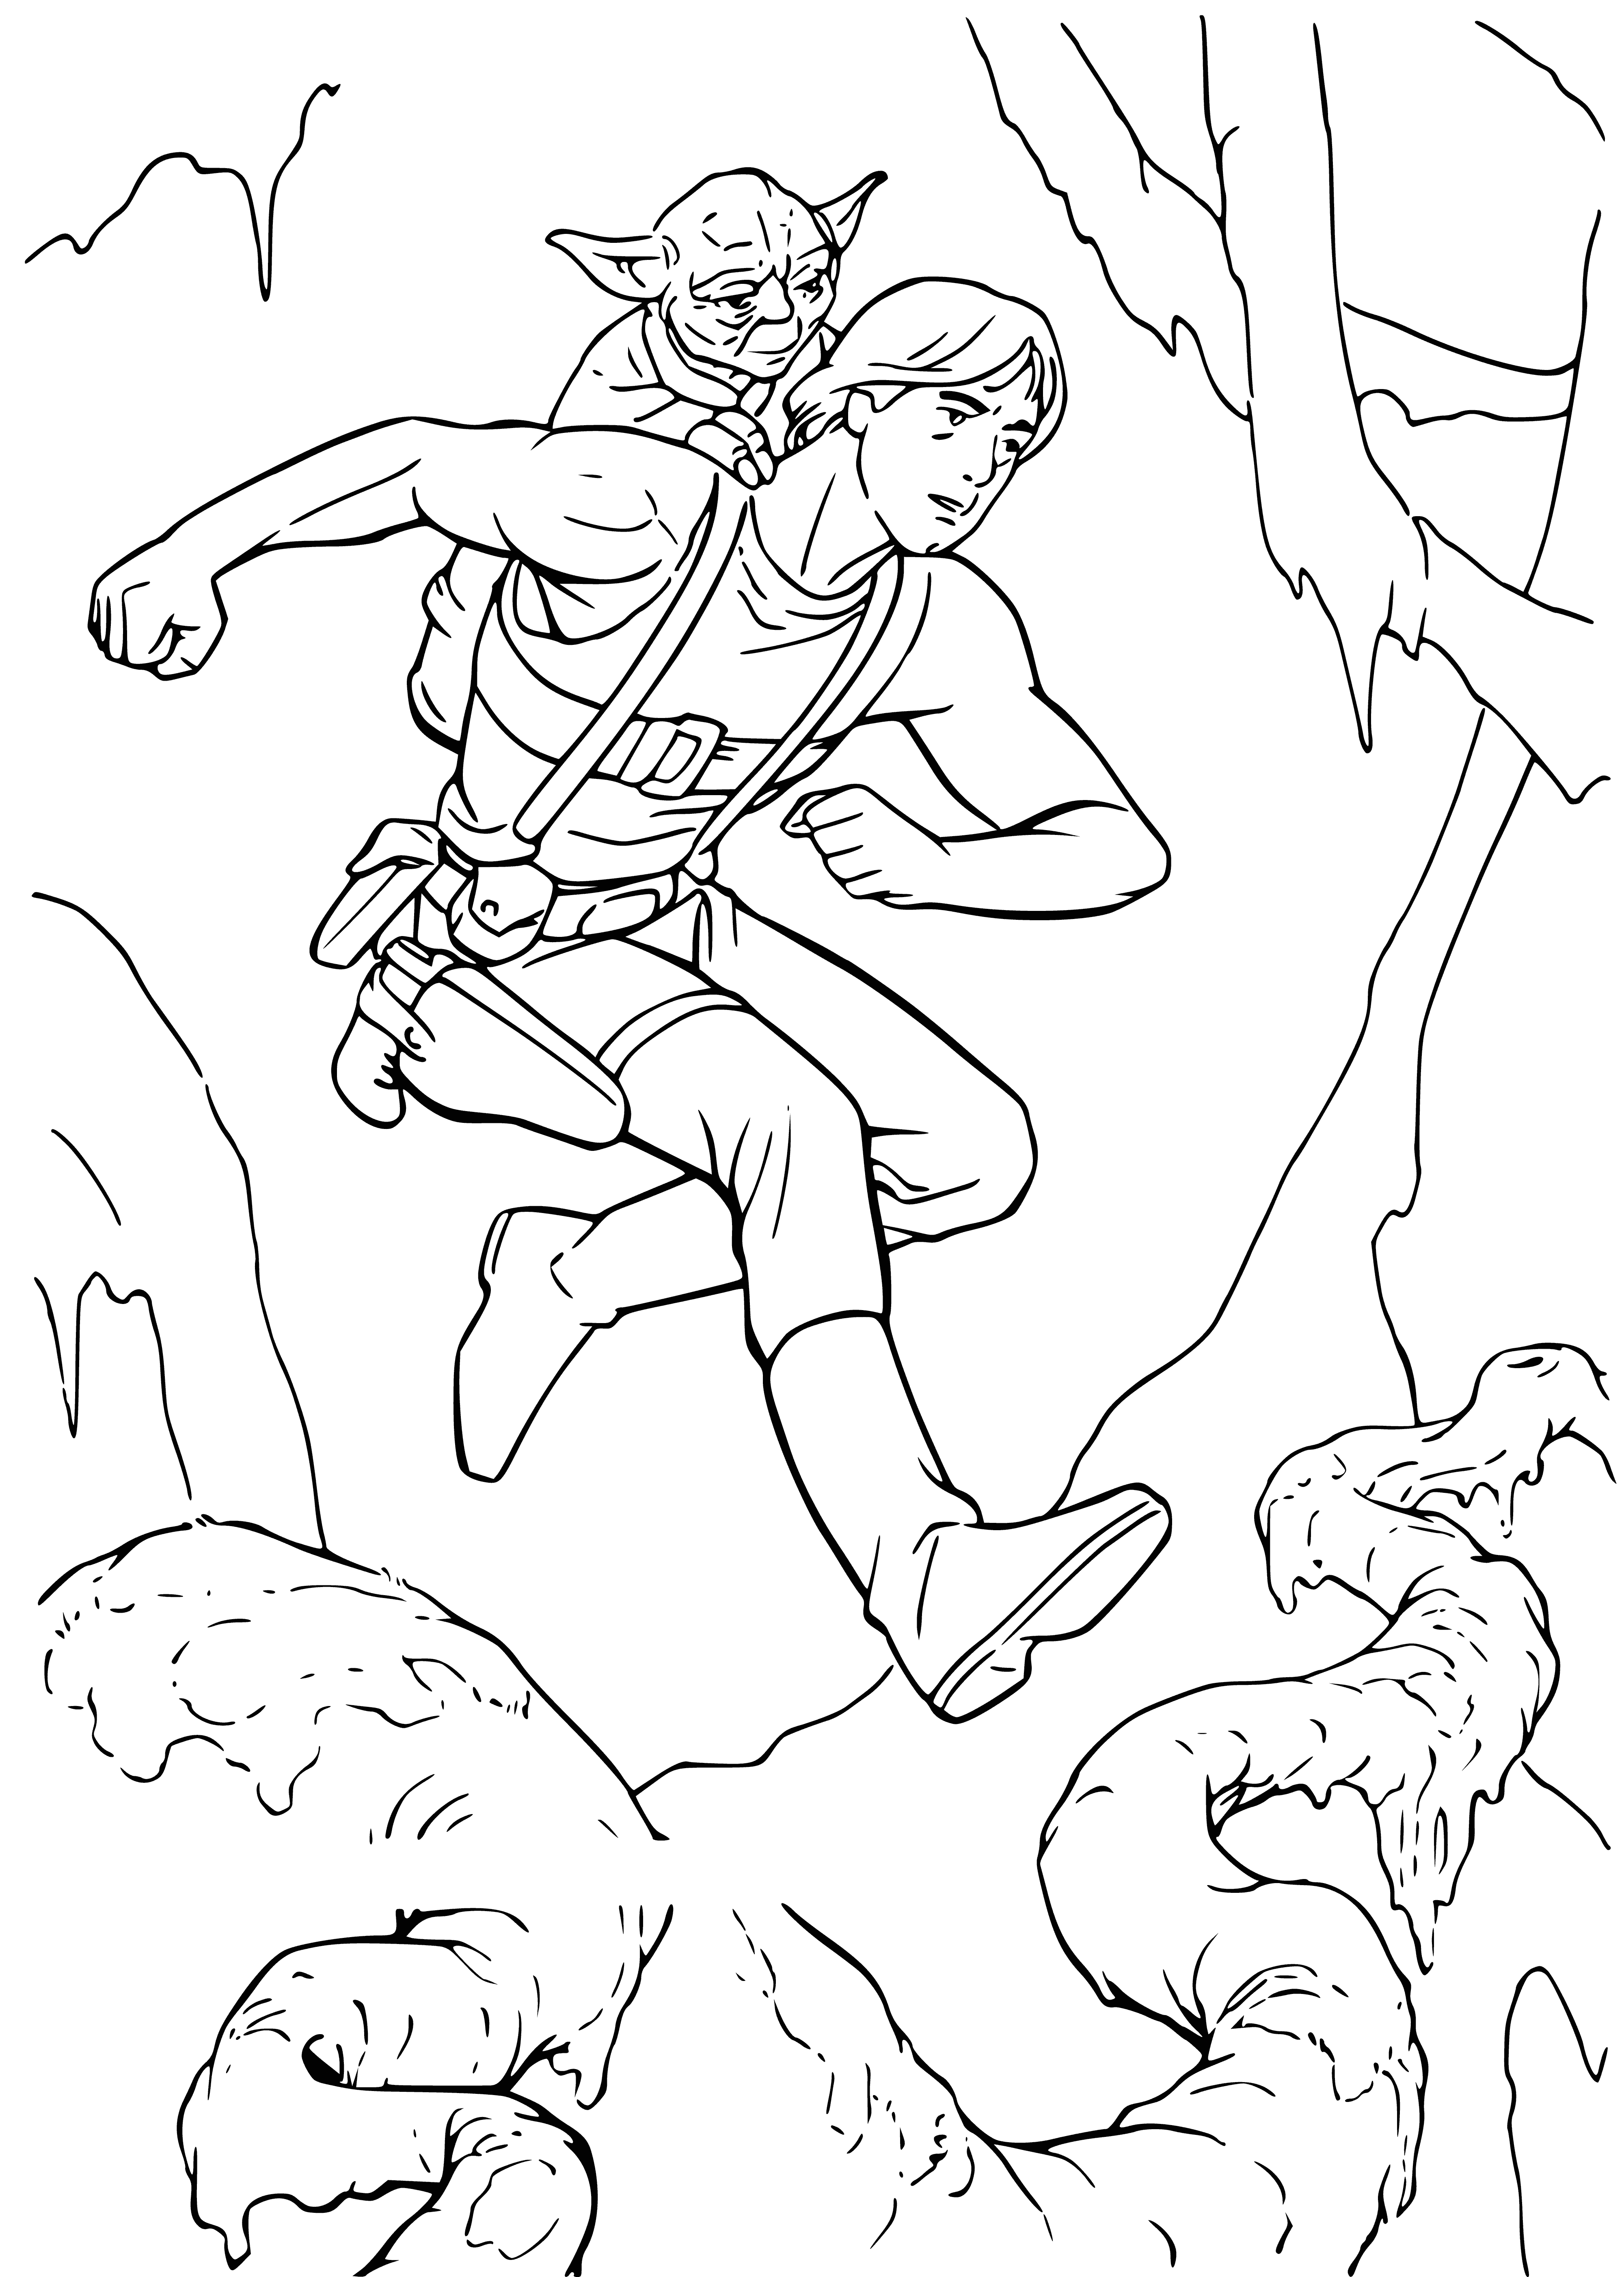 Luke and teacher Yoda coloring page